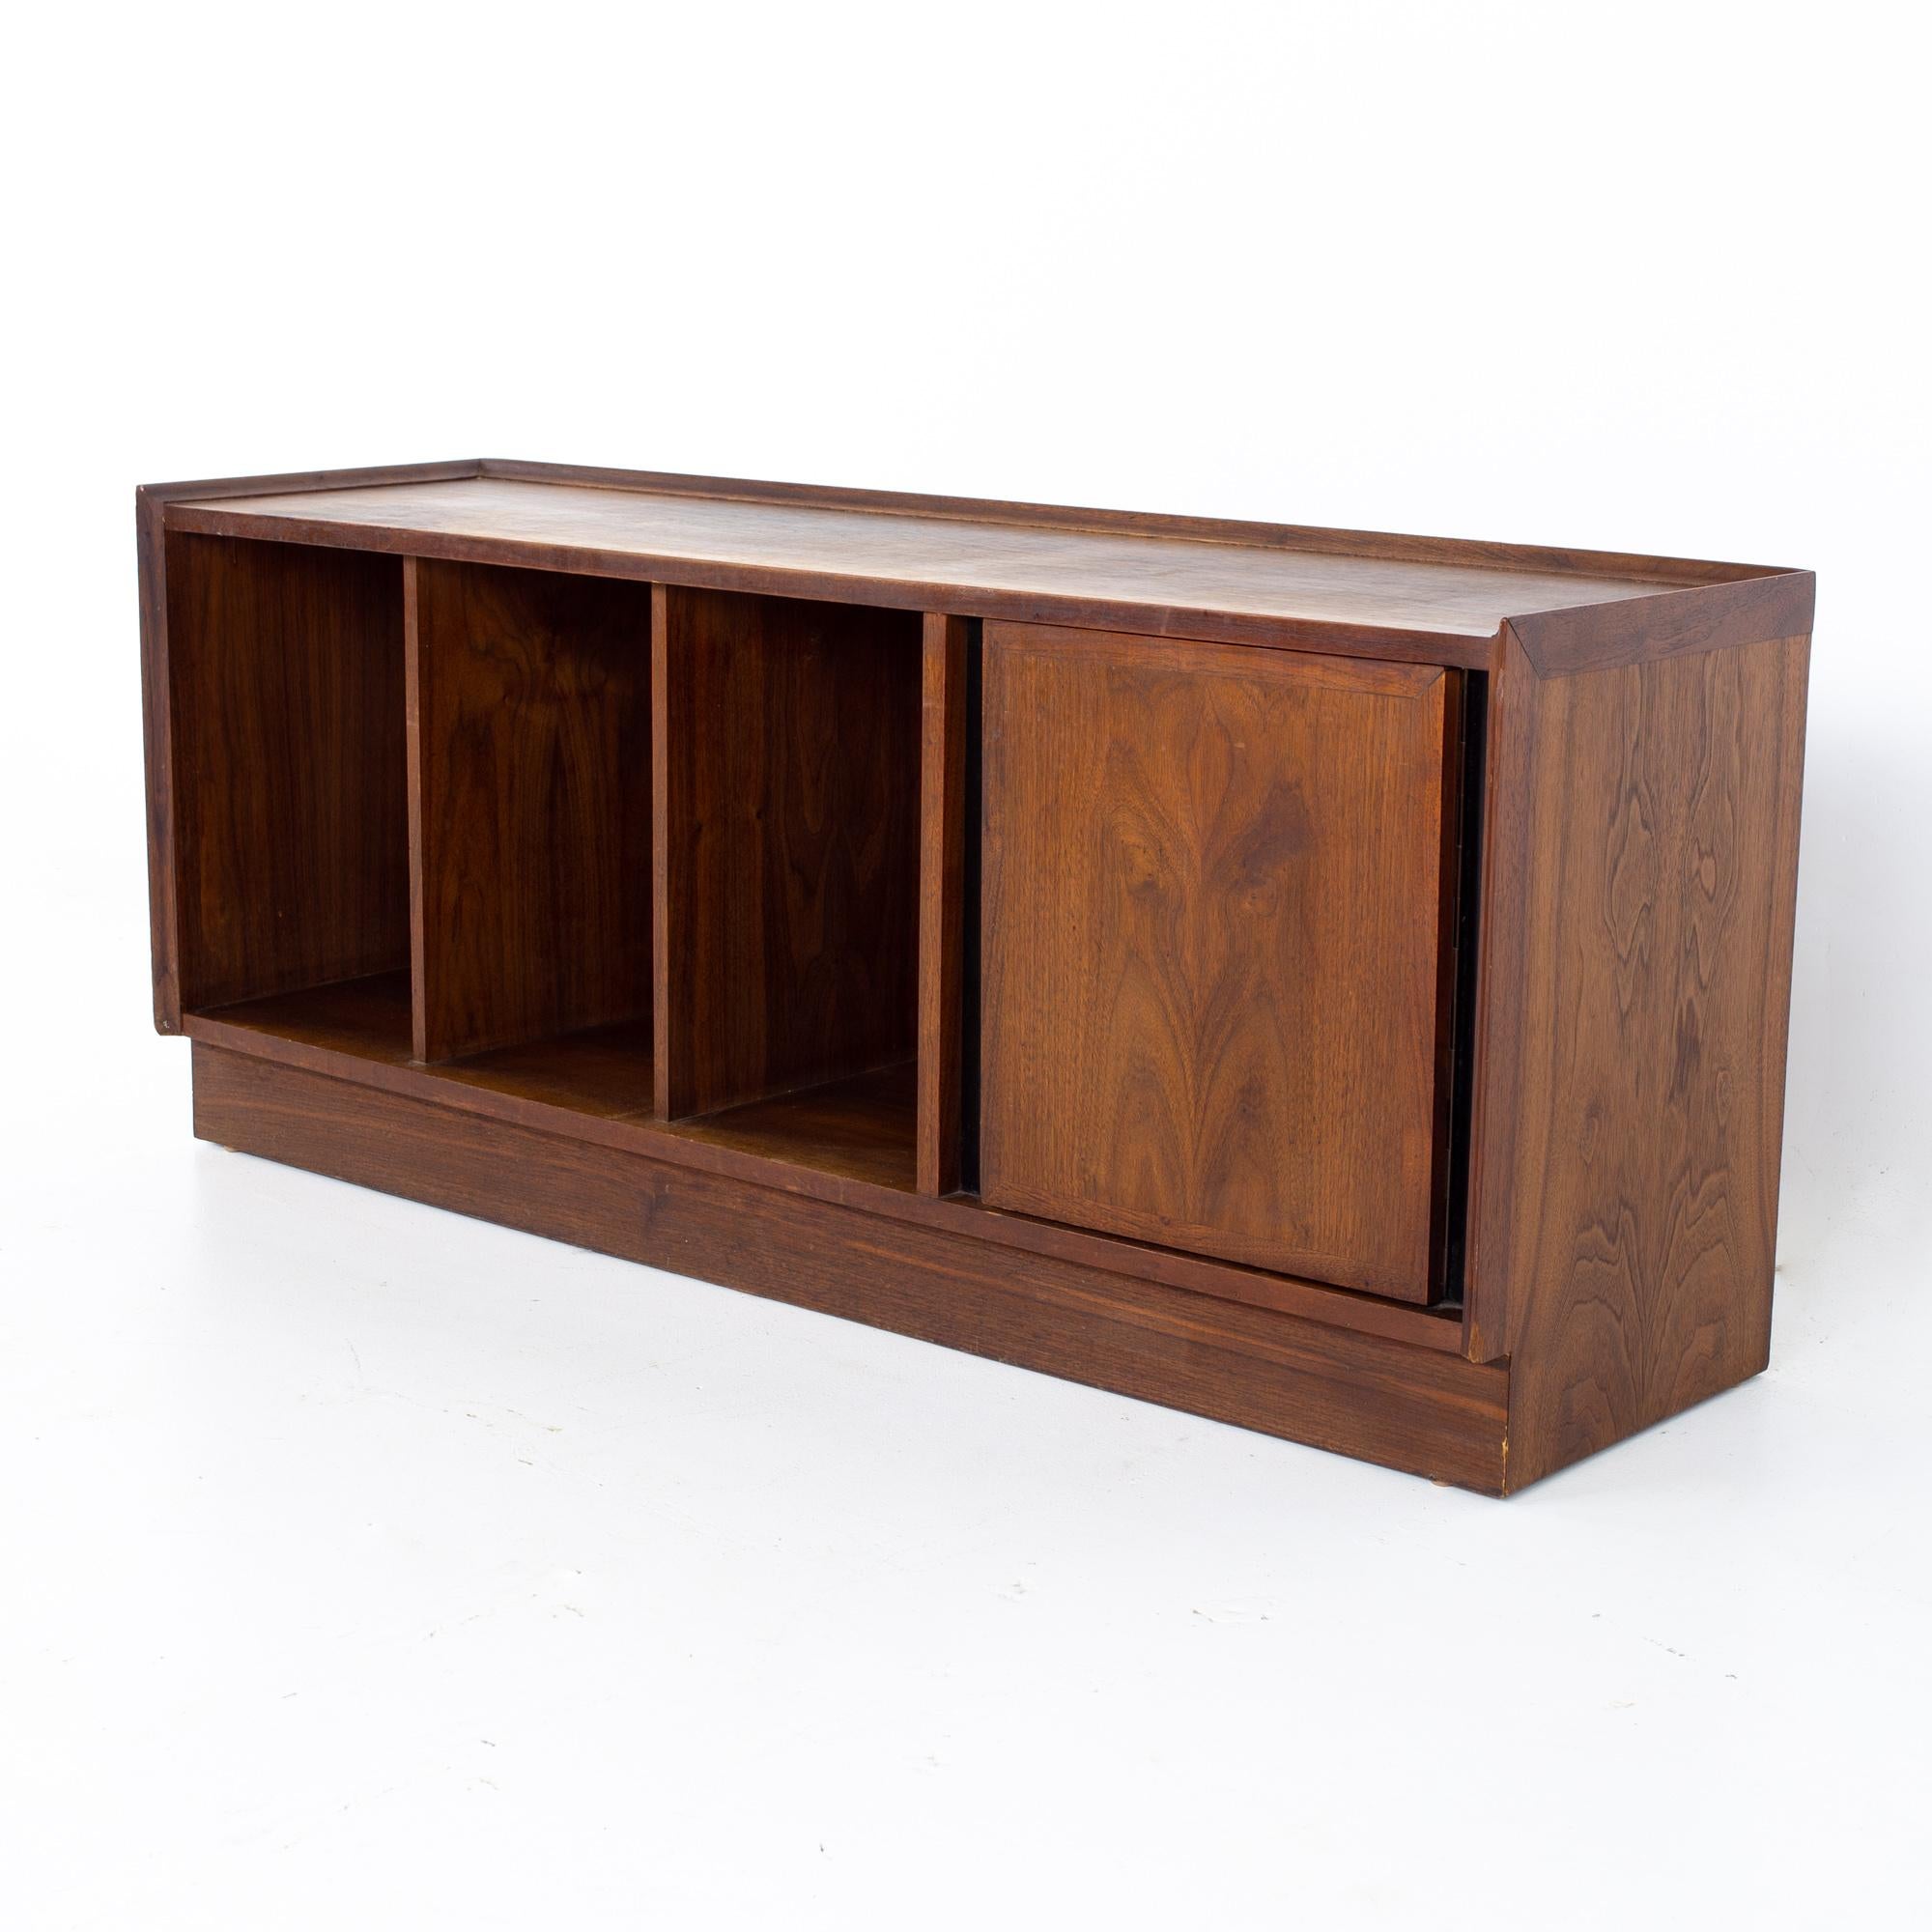 Merton Gurshun Dillingham Esprit Mid Century record cabinet bench
Cabinet measures: 48 wide x 13.25 deep x 20 inches high

All pieces of furniture can be had in what we call restored vintage condition. That means the piece is restored upon